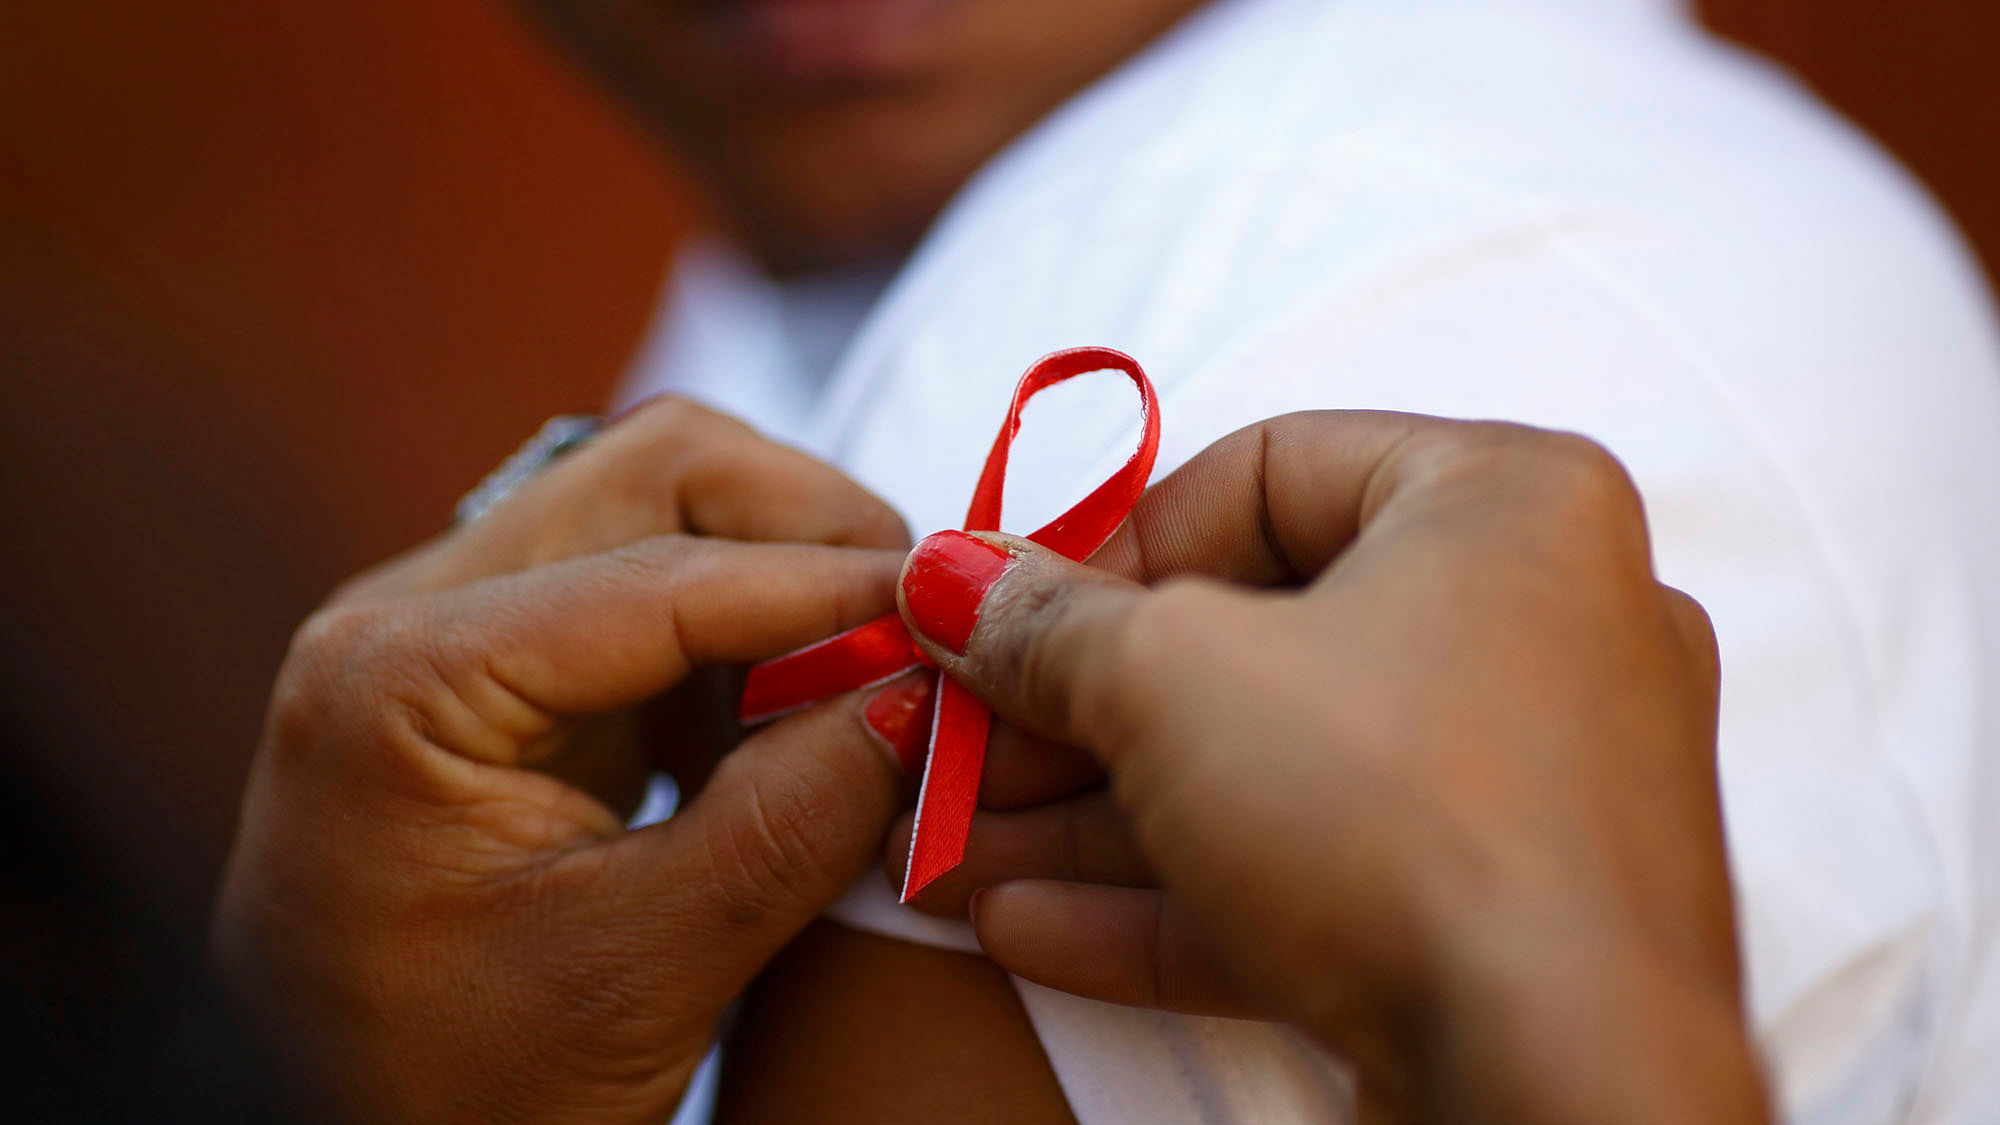 A red ribbon in support of HIV positive patients. (Photo: Reuters)